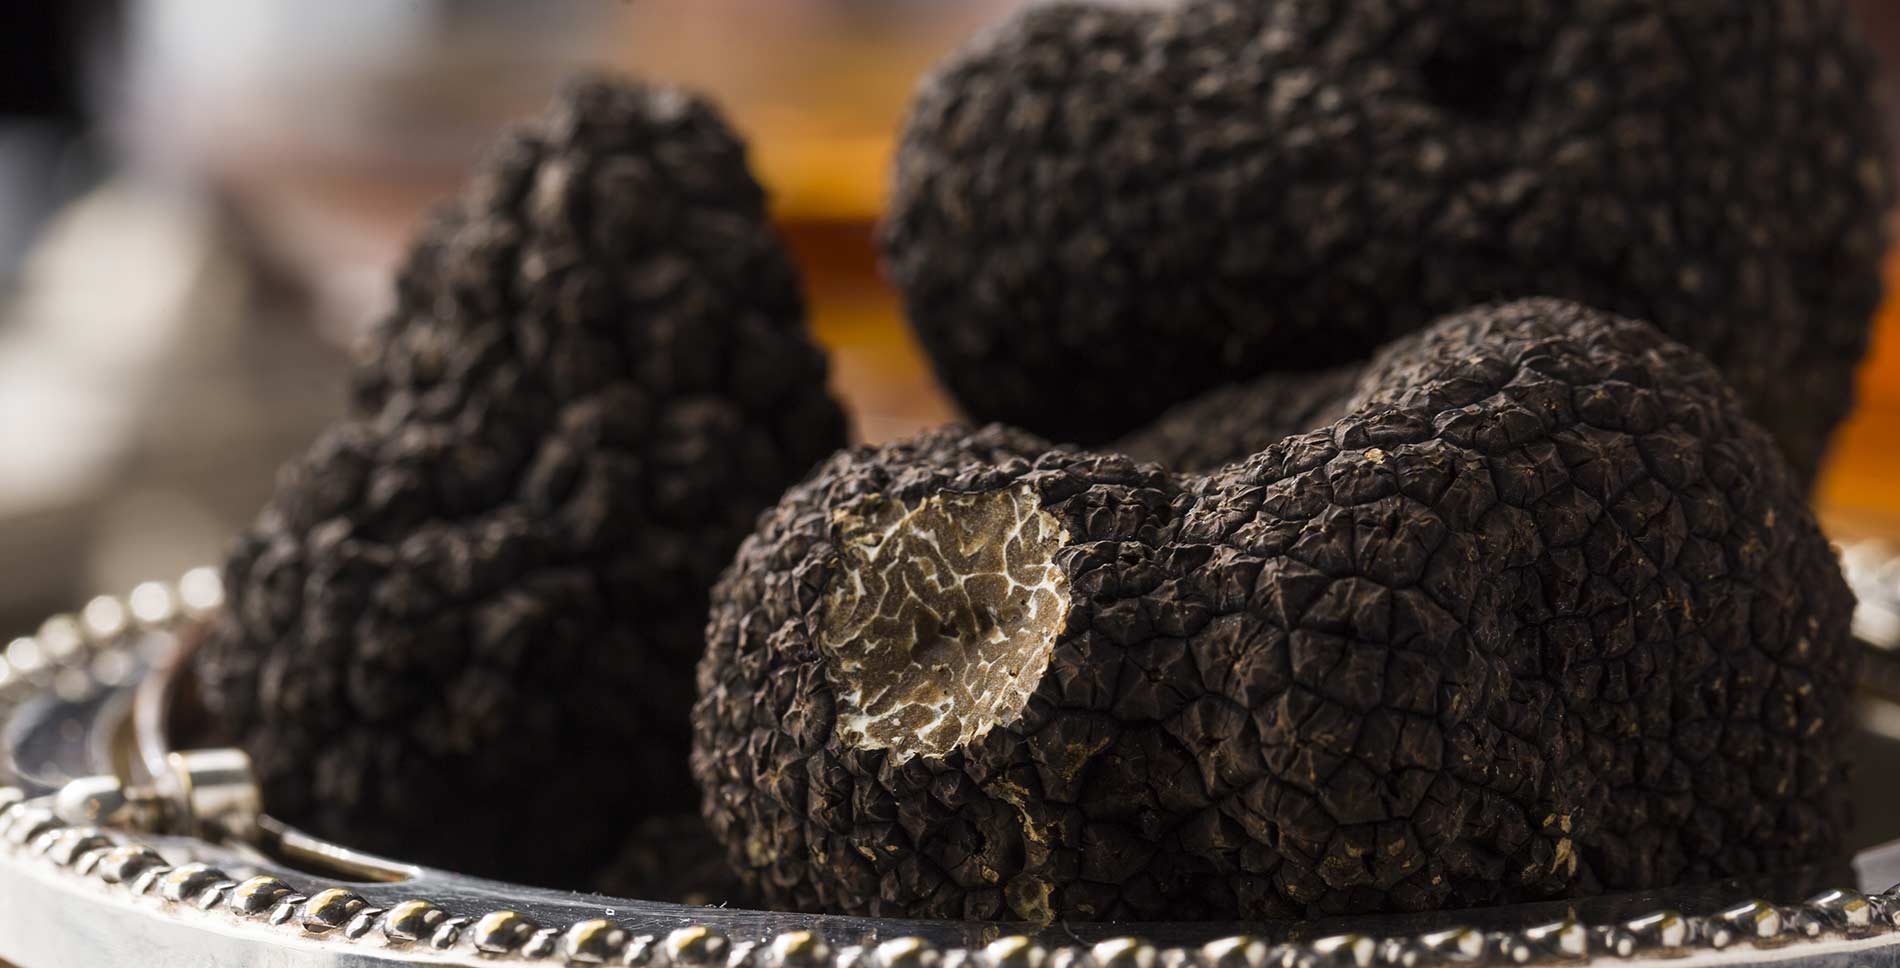 The quality of our truffles